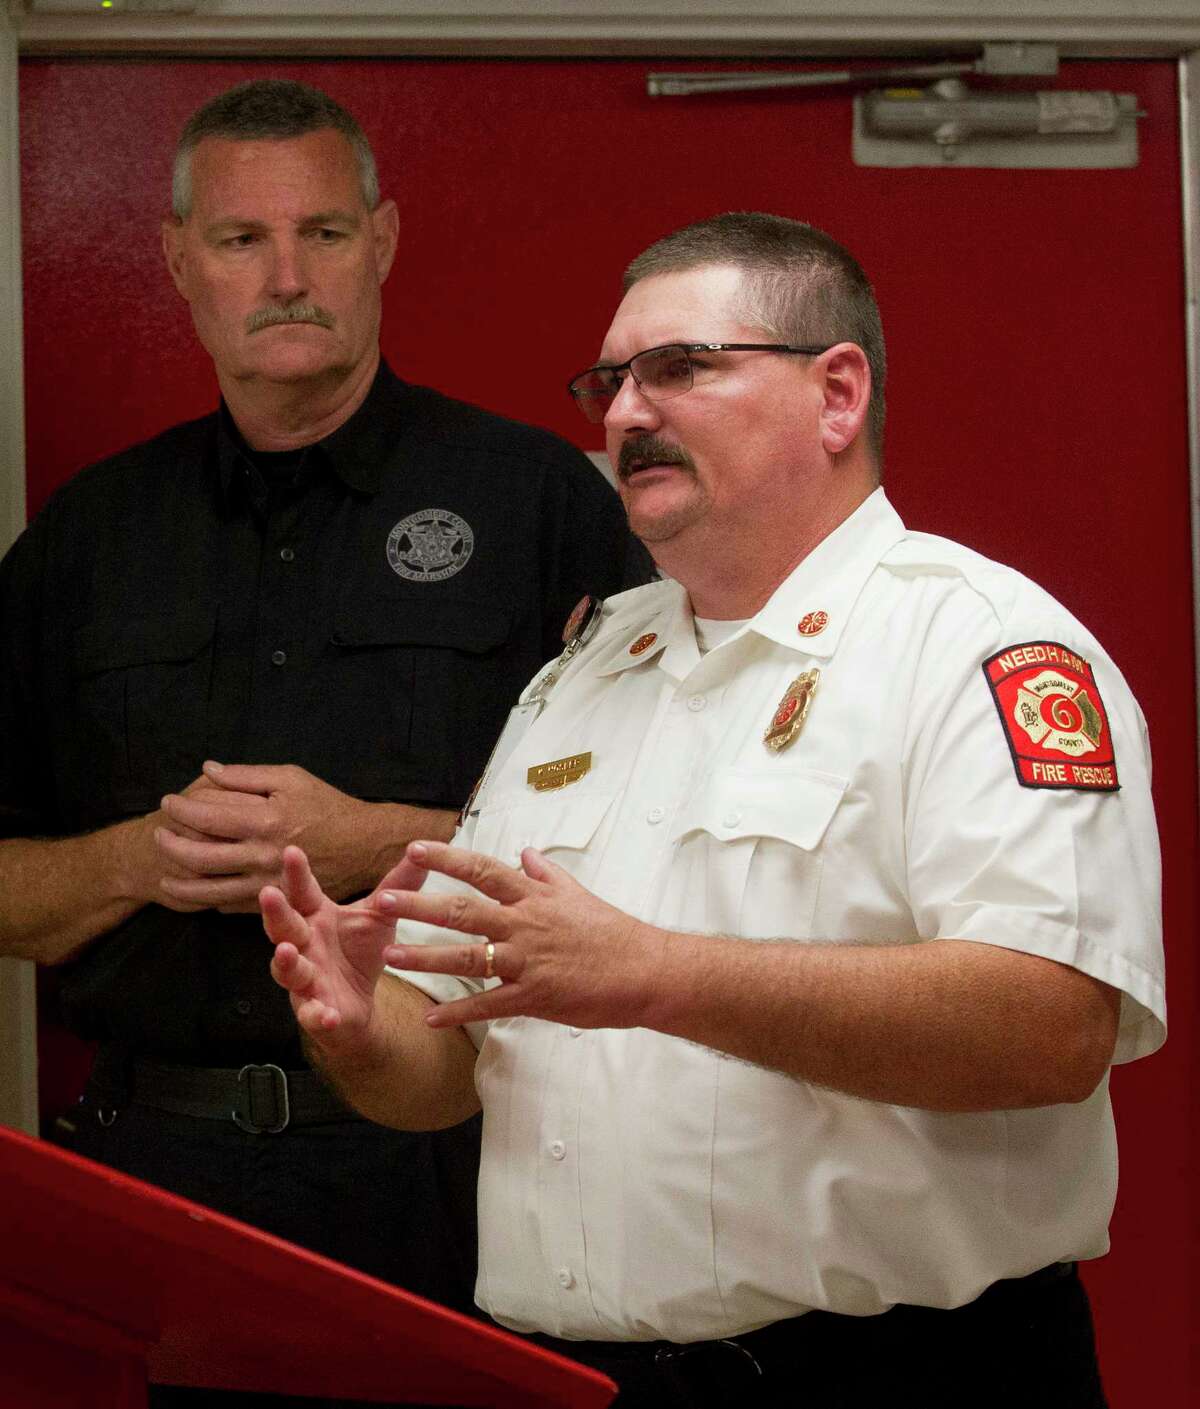 Montgomery County Fire Marshal Jimmy Williams speaks alongside Needham Fire Department Chief Kevin Hosler during a press conference at the Needham Fire Station, Thursday. Williams announced a new safety initiative to install smoke detectors in home for Tamina community, east of The Woodlands, at an event later to be determined. The initiative stems from a two-story house fire on May 12 in Tamina that killed three children and injured five others.